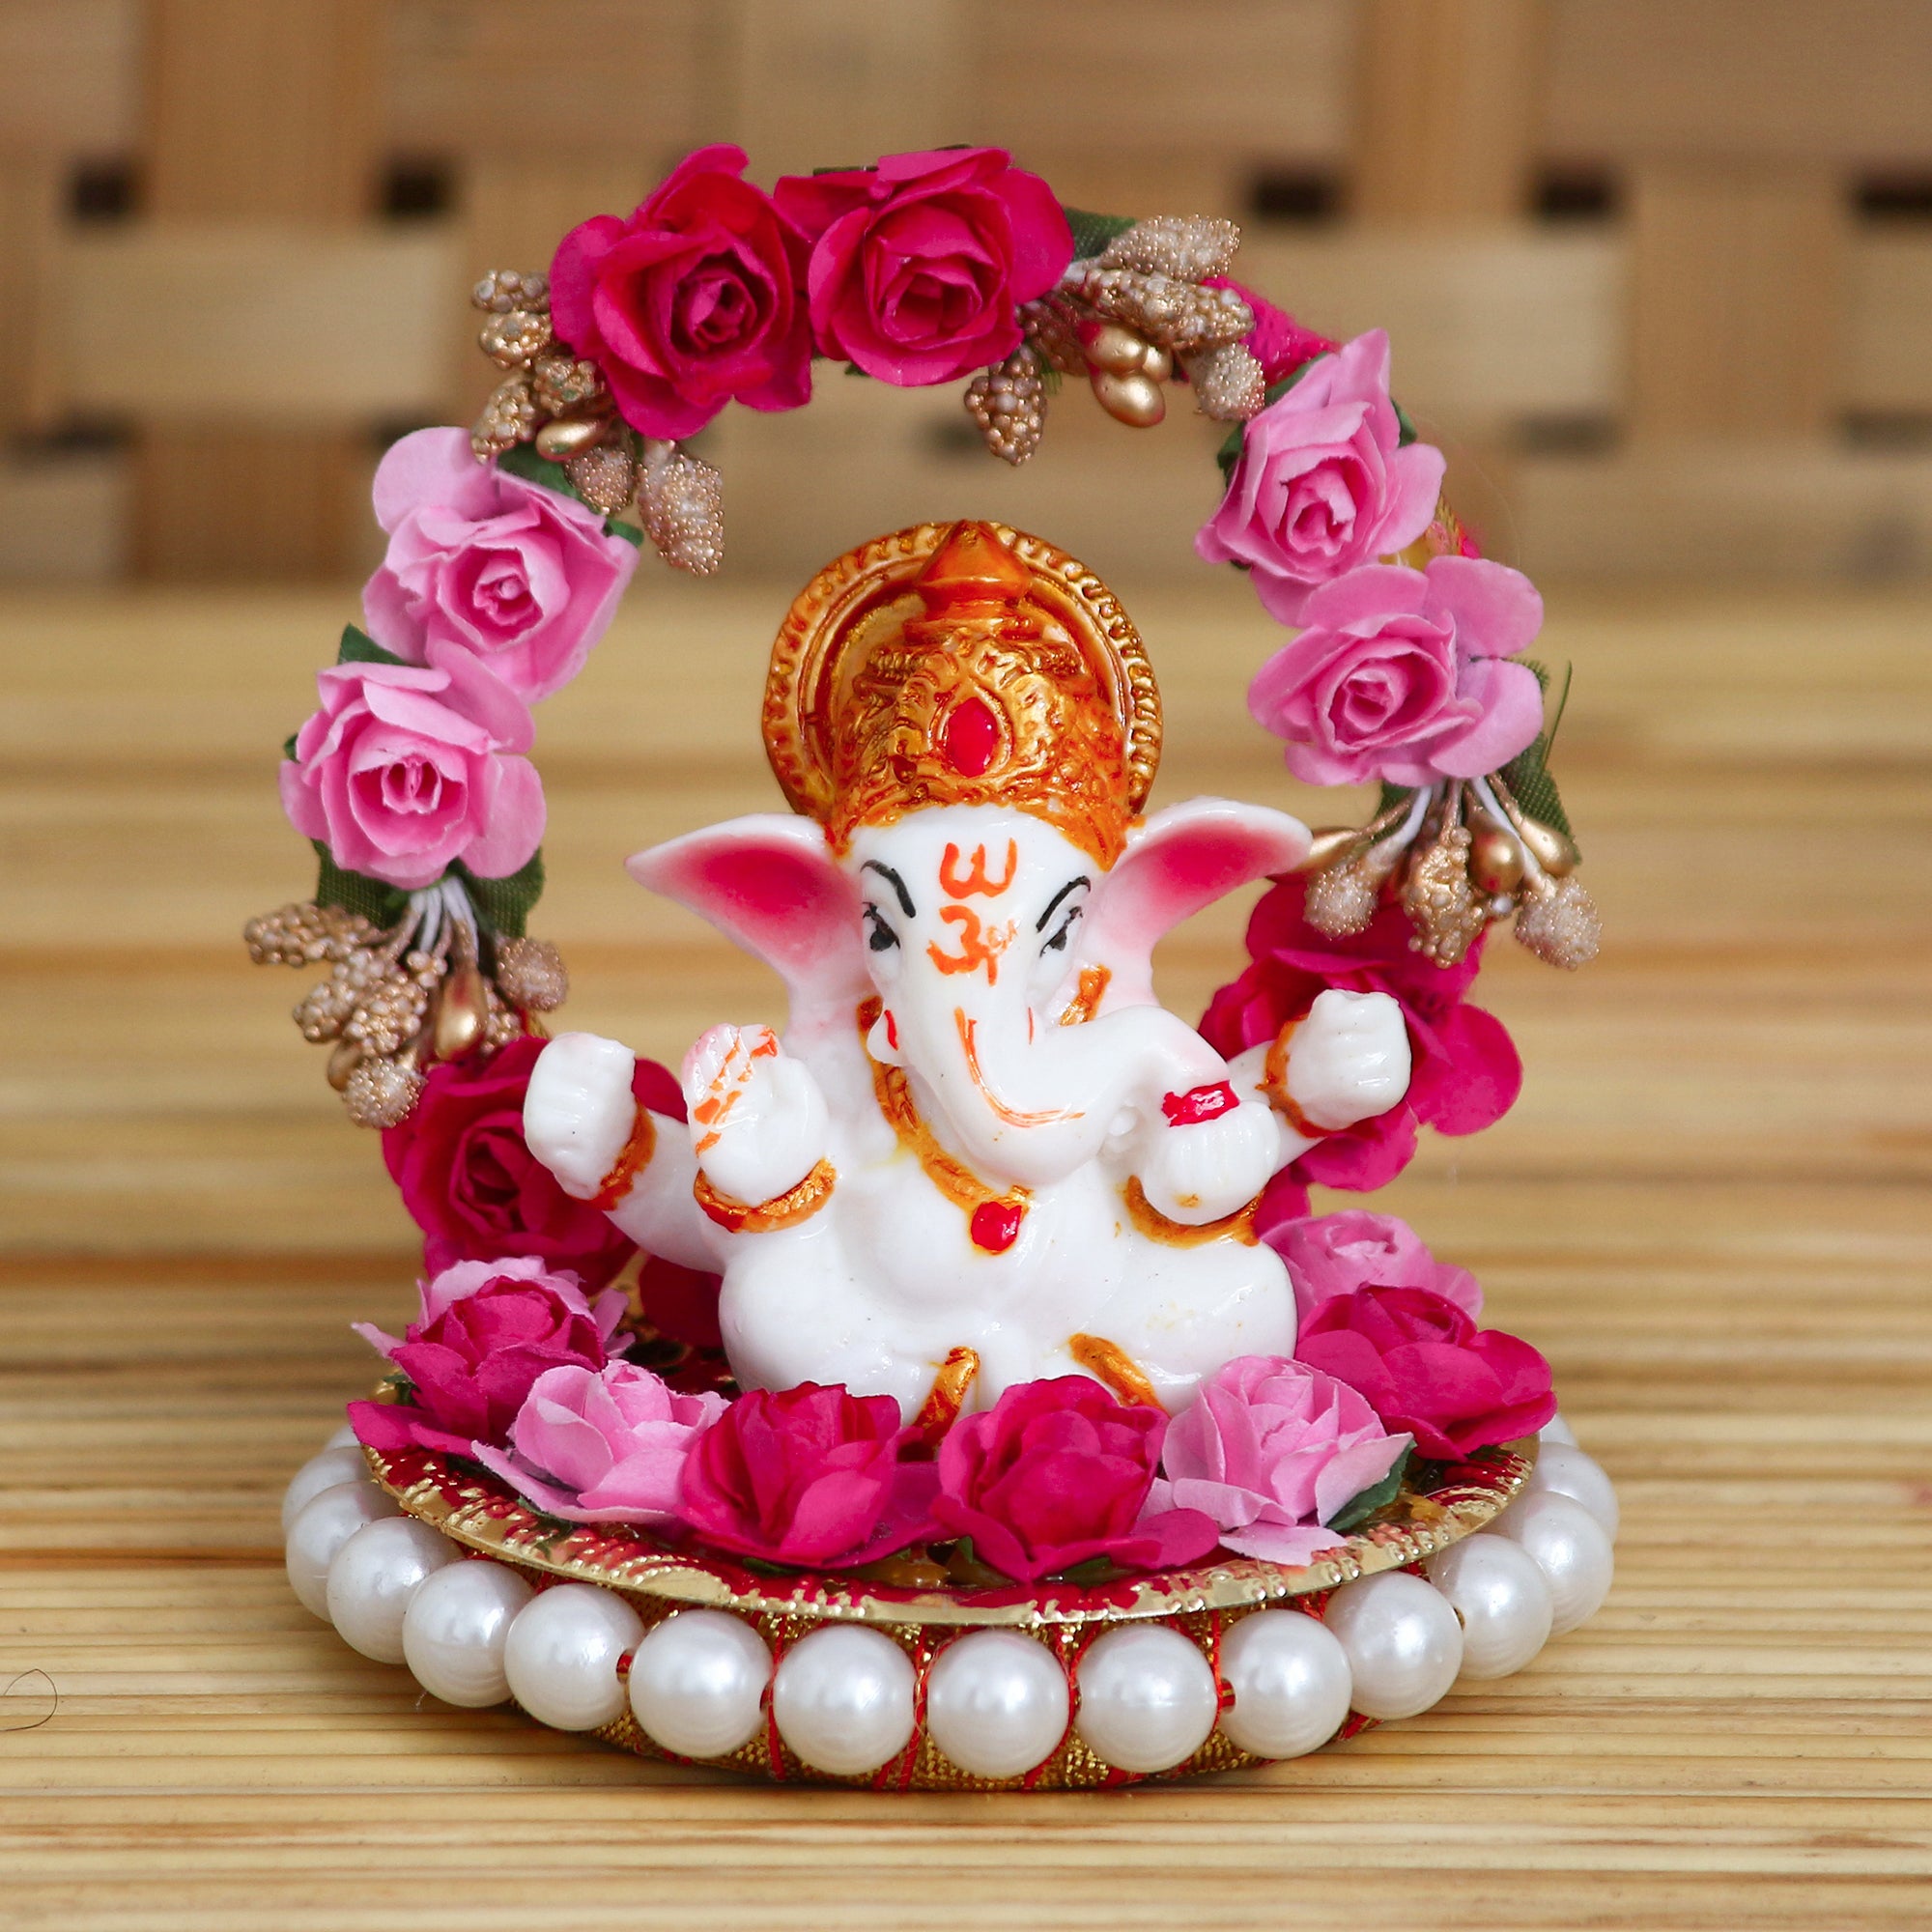 Polyresin Lord Ganesha Idol on Decorative Handcrafted Plate with Throne of Pink and Red Flowers